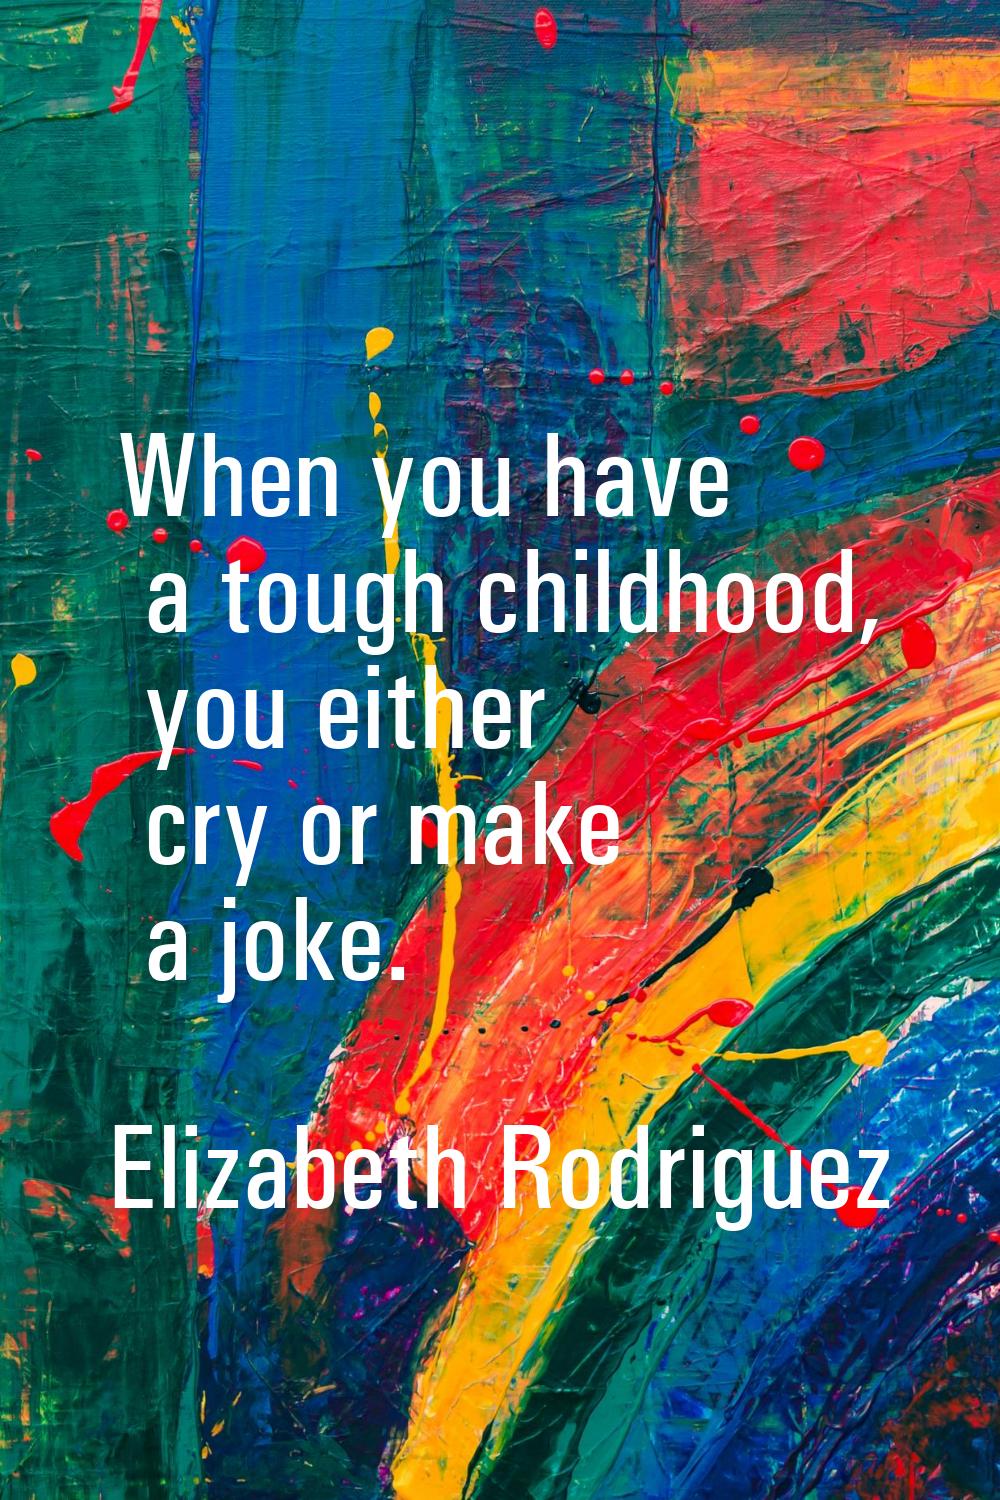 When you have a tough childhood, you either cry or make a joke.